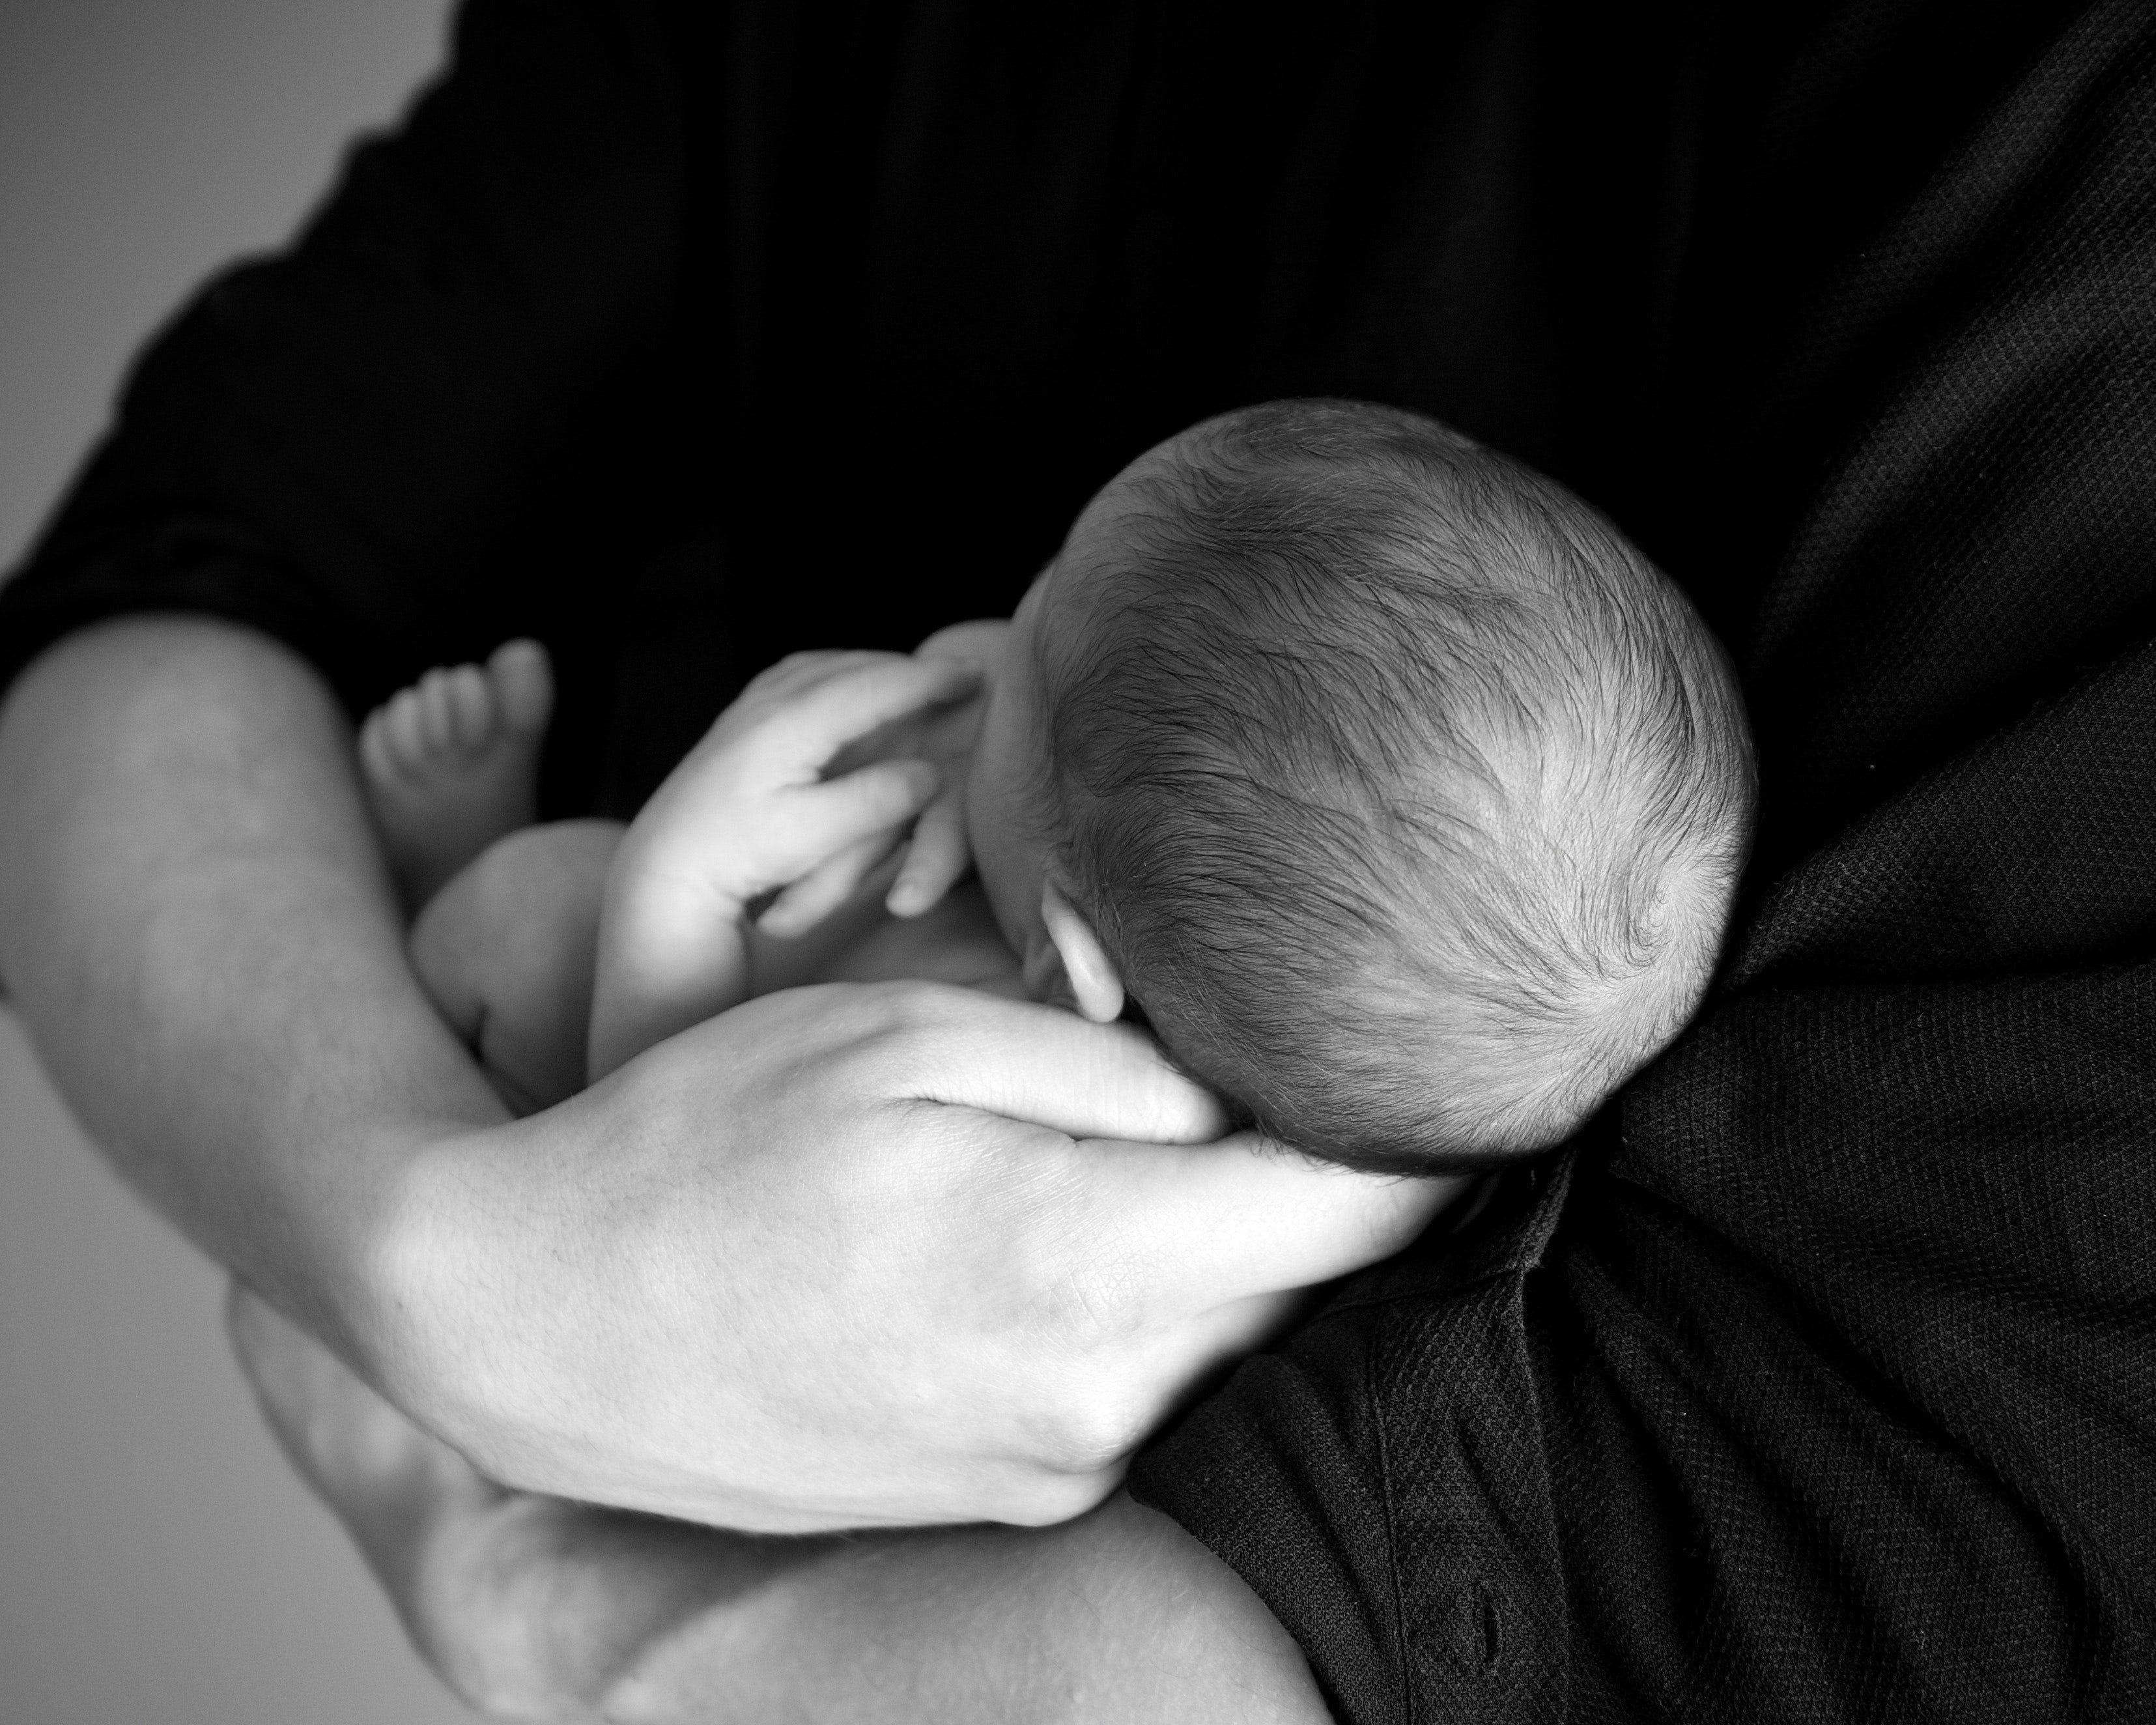 Mother holding her baby. | Source: Pexels